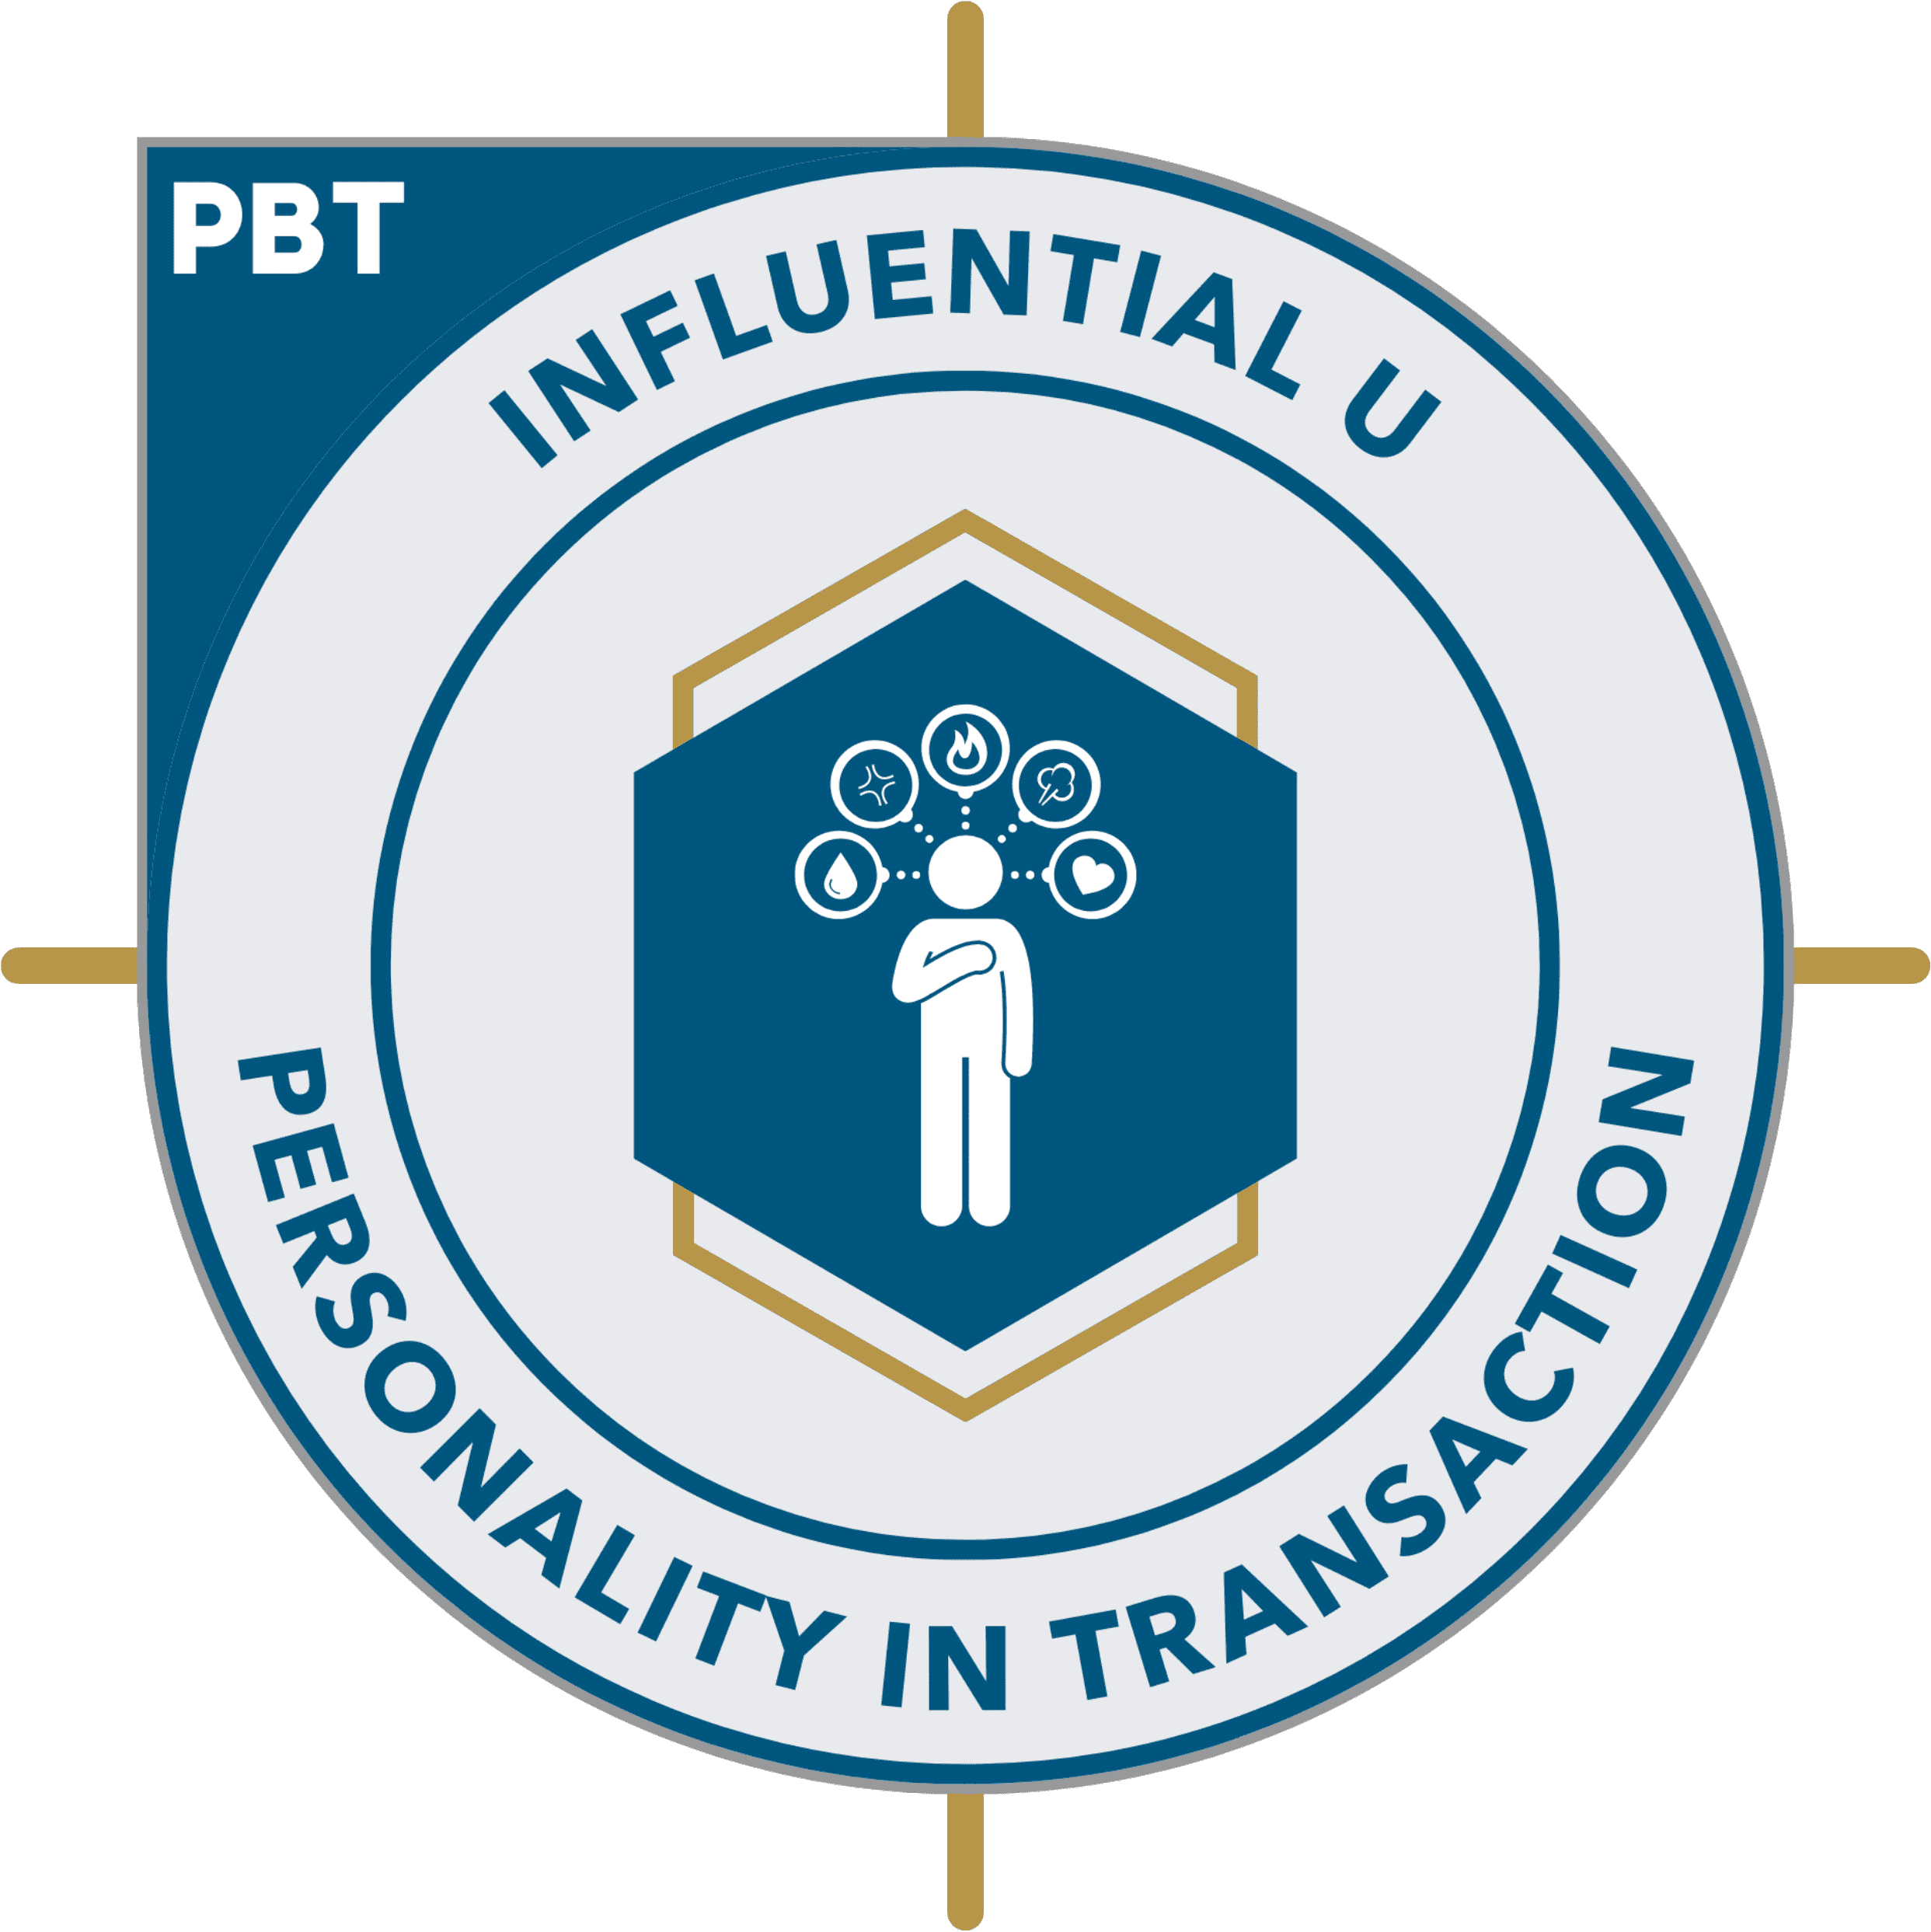 Personality and Behaving Transactionally, Influential U